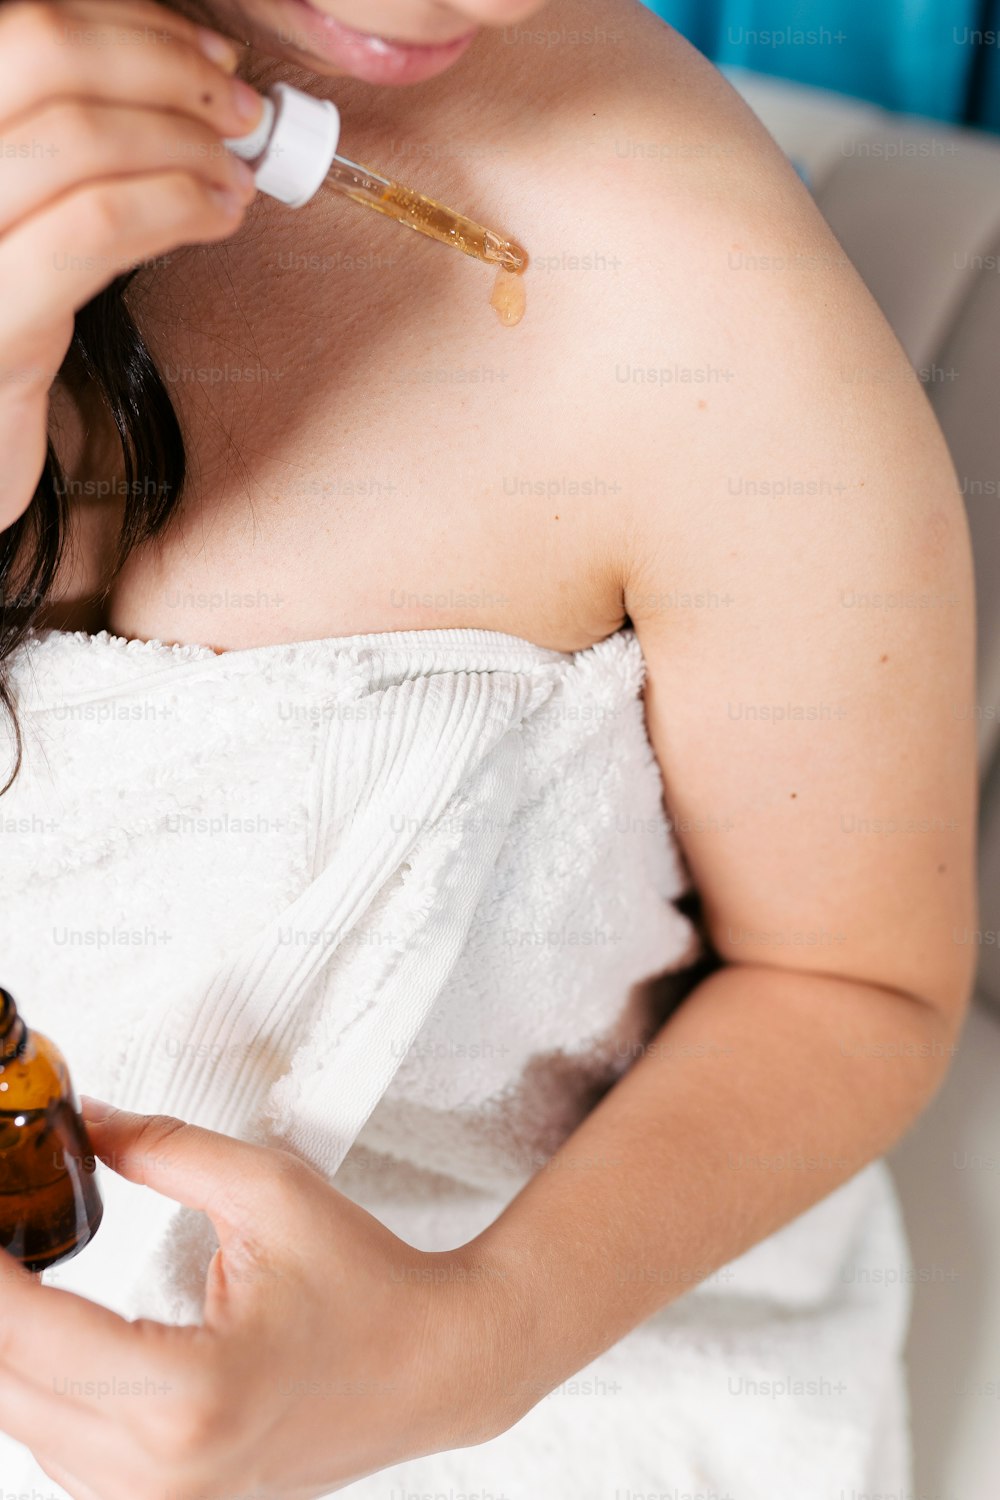 a woman in a white towel holding a bottle of essential oils